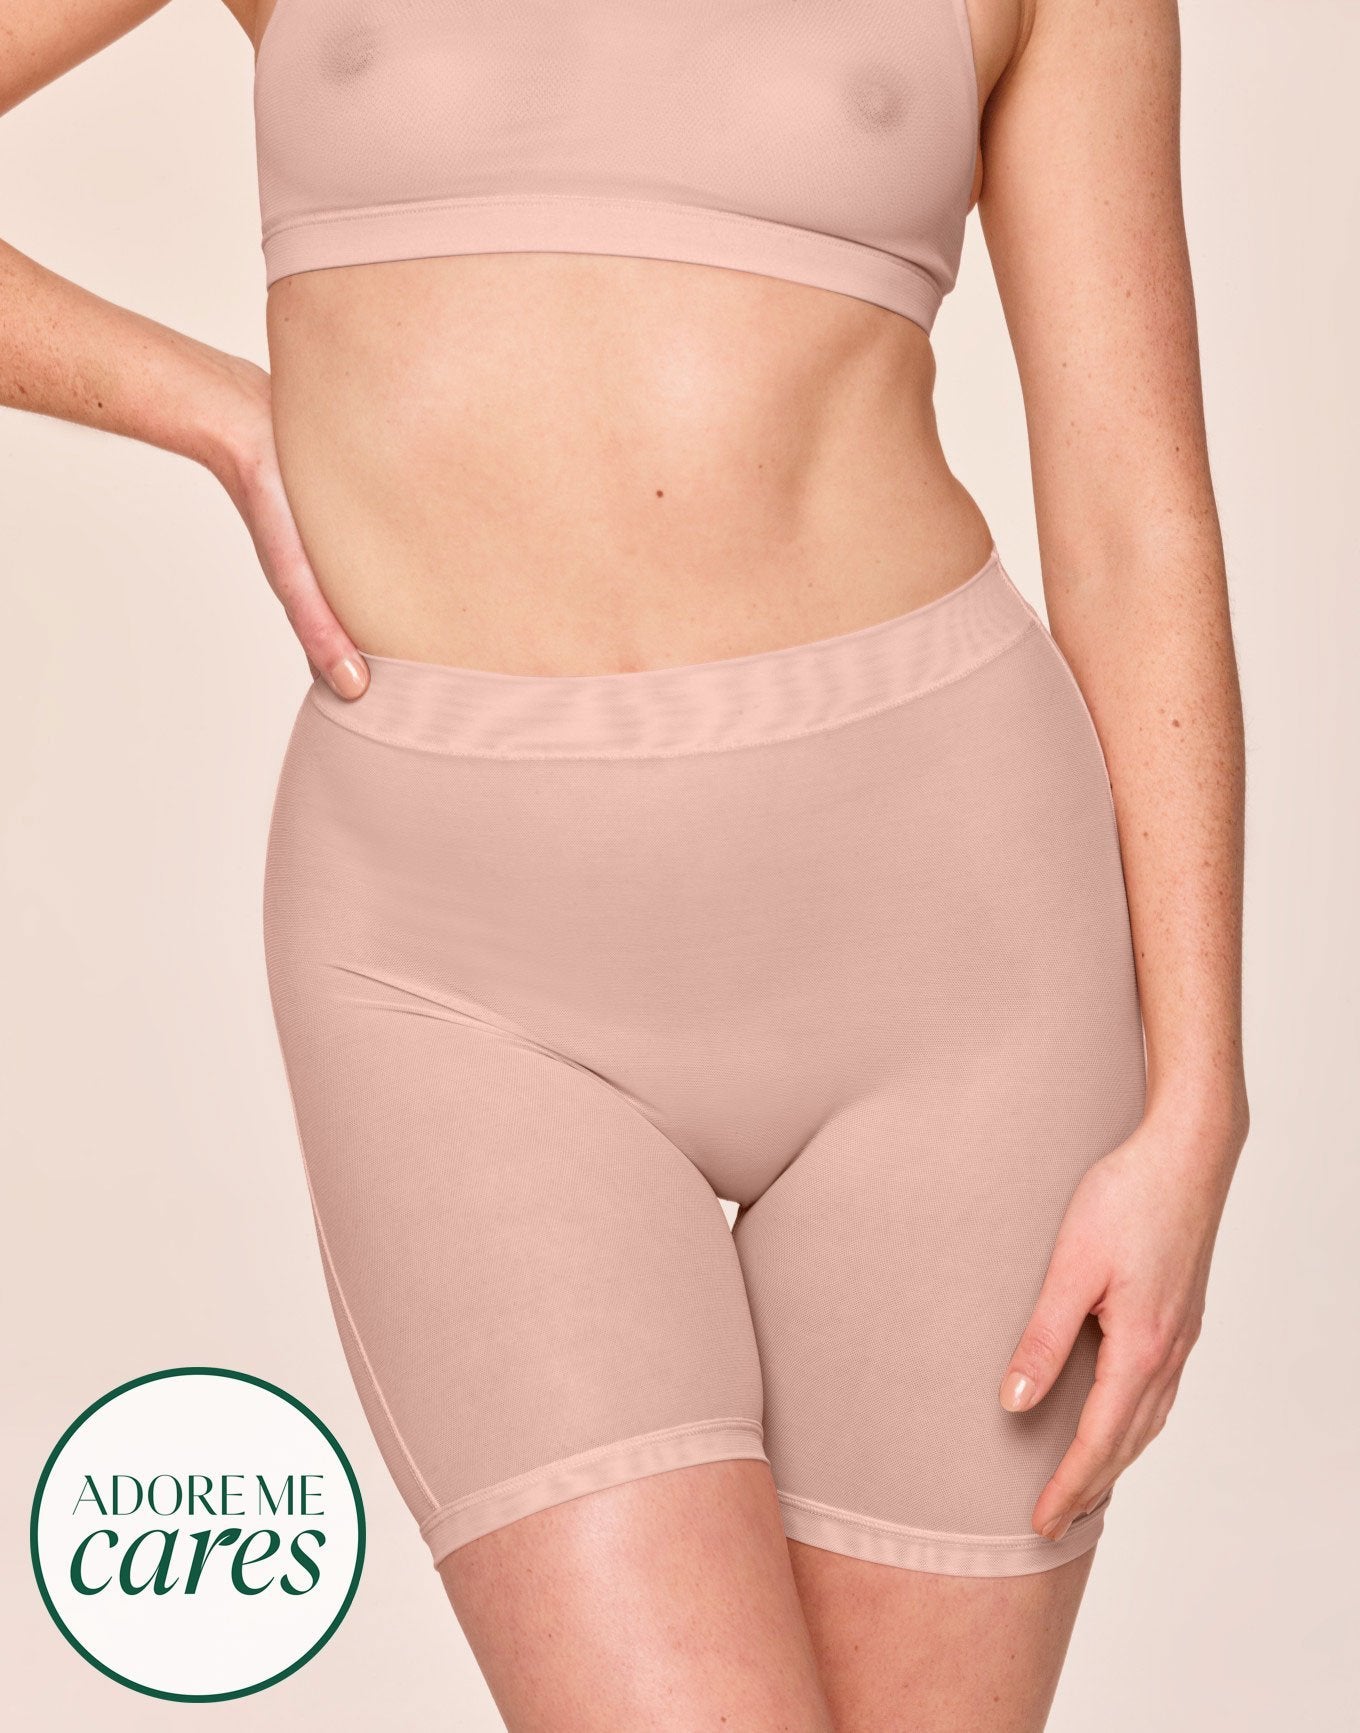 nueskin Dina Mesh High-Rise Shortie in color Rose Cloud and shape shortie